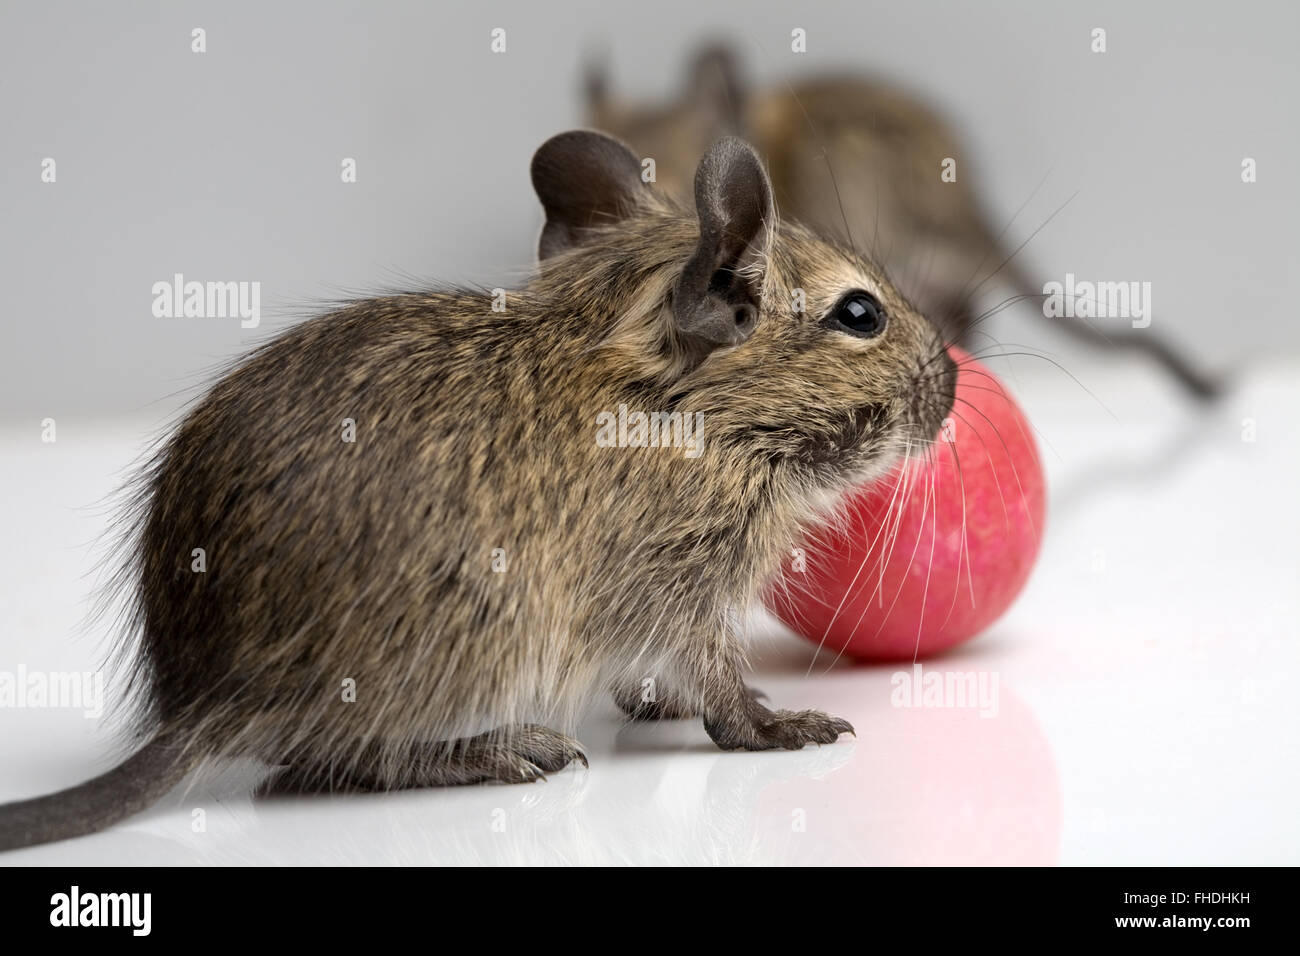 little baby degu mice with red radish closeup view on neutral background Stock Photo